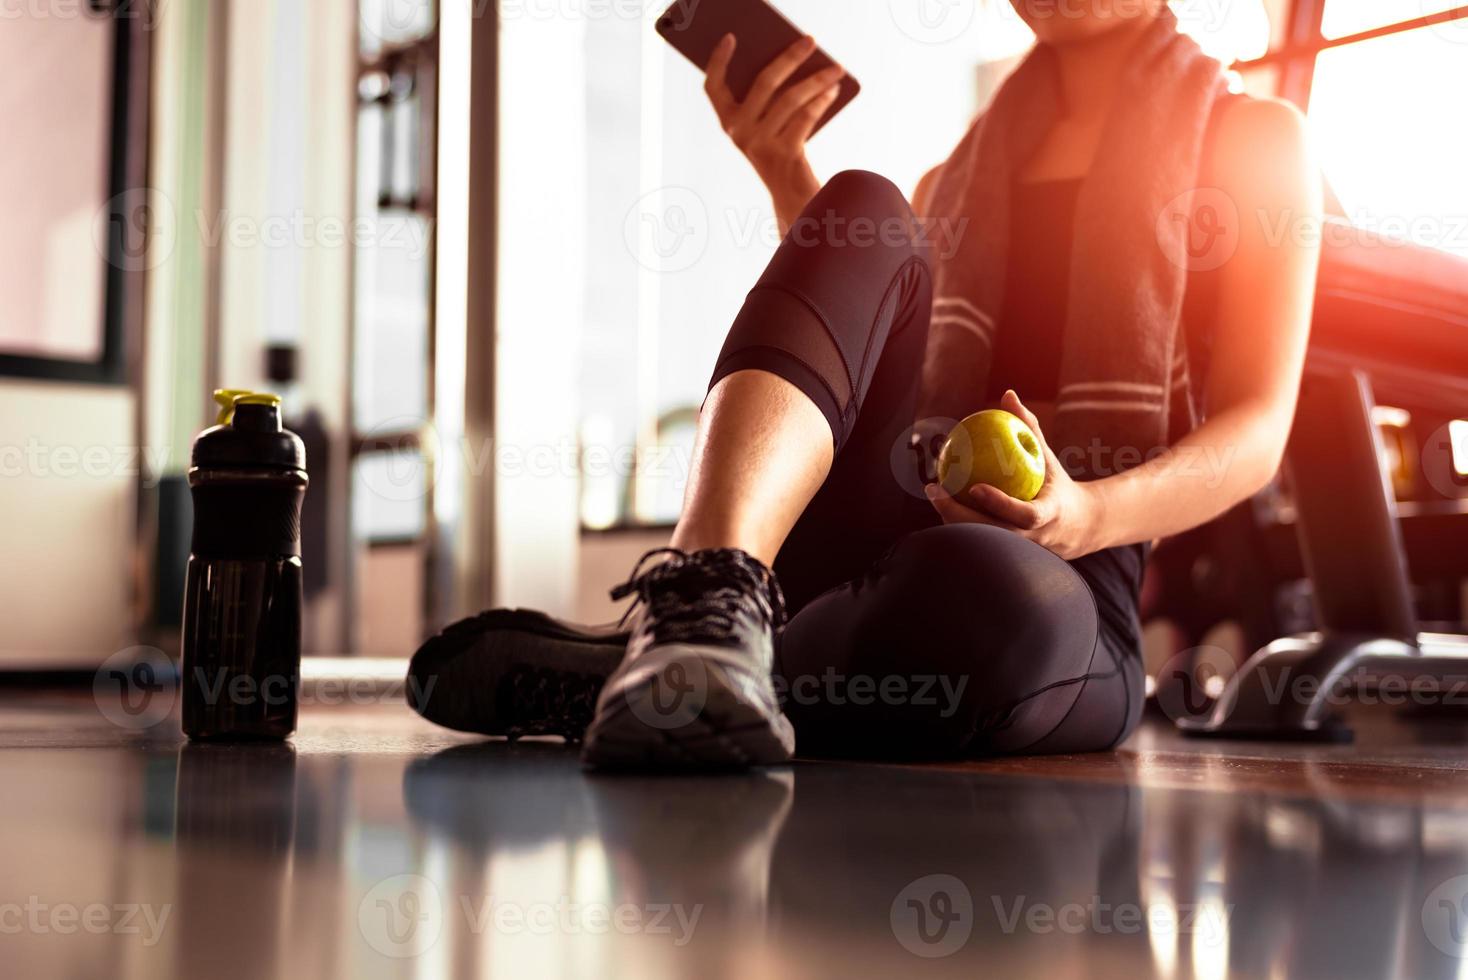 Close up of woman using smart phone and holding apple while workout in fitness gym. Sport and Technology concept. Lifestyles and Healthcare theme photo